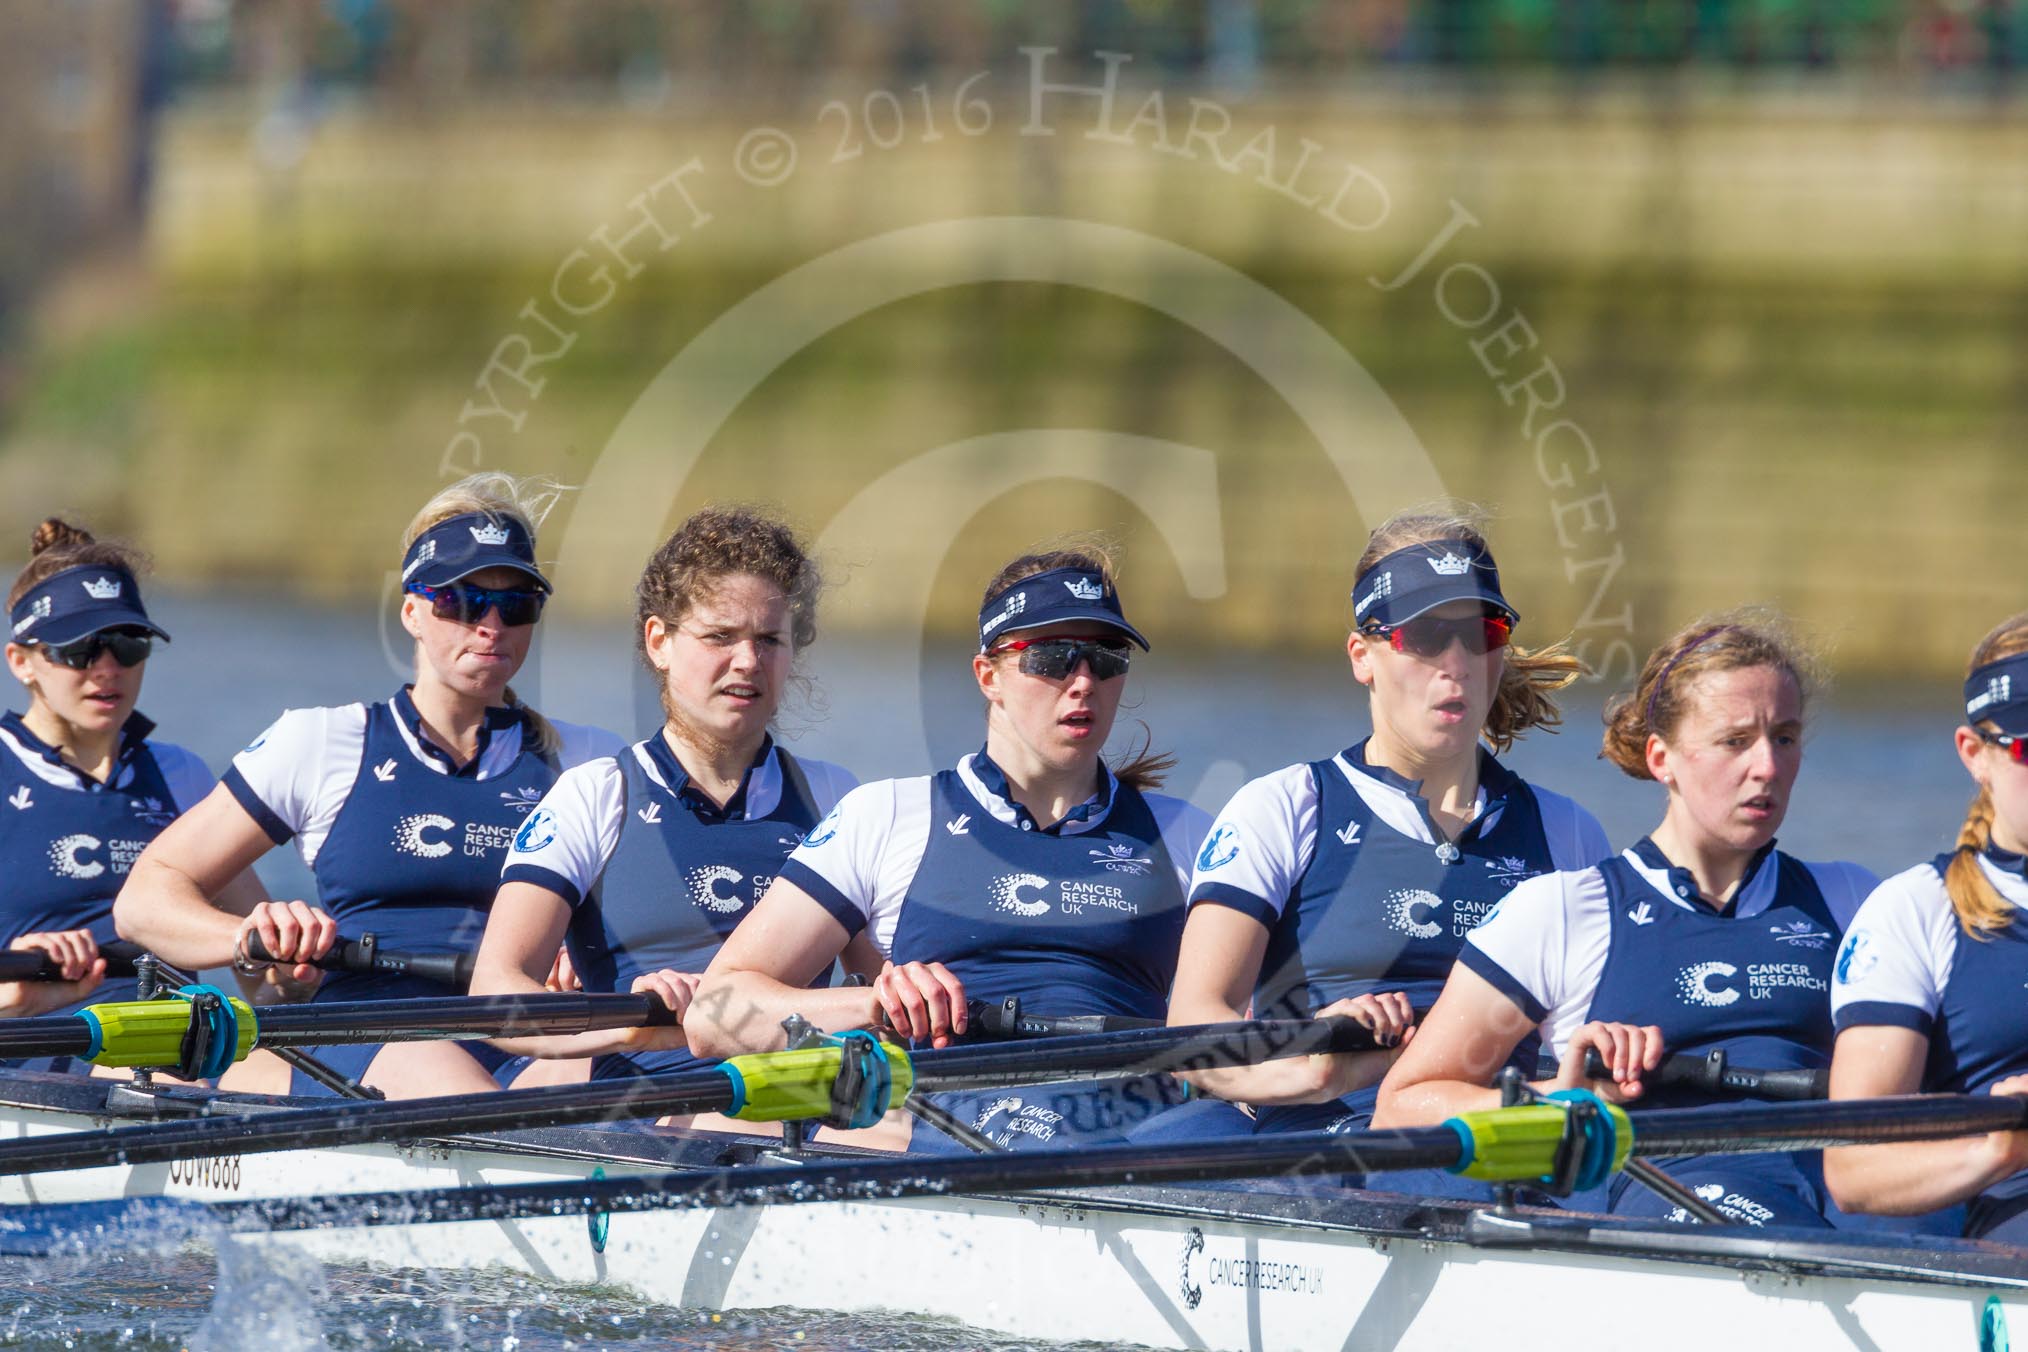 The Boat Race season 2016 -  The Cancer Research Women's Boat Race.
River Thames between Putney Bridge and Mortlake,
London SW15,

United Kingdom,
on 27 March 2016 at 14:11, image #191